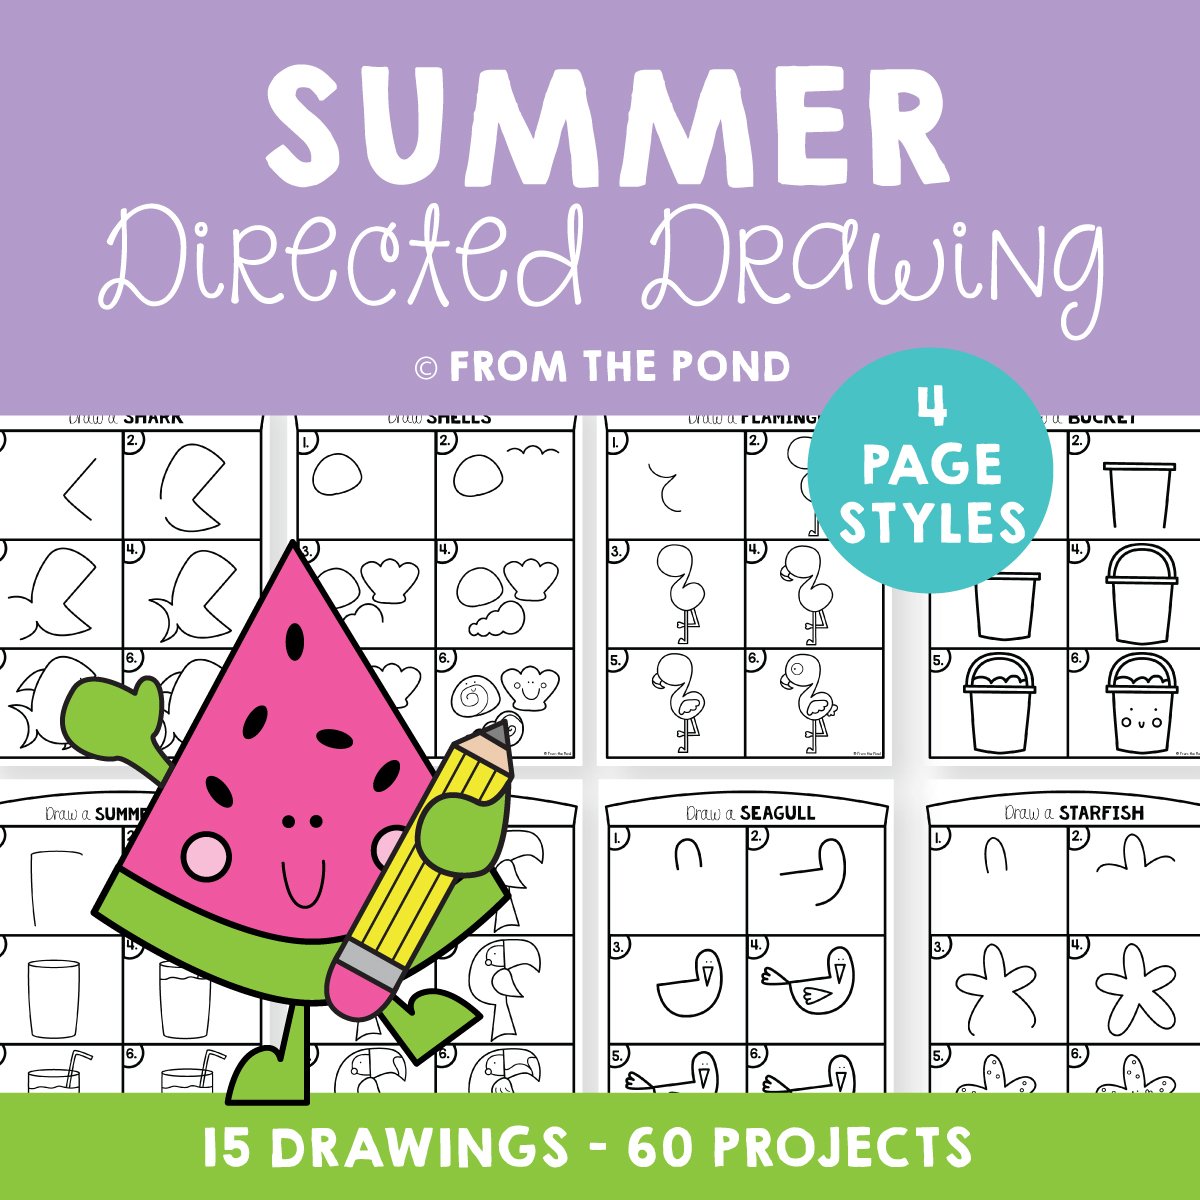 Summer Directed Drawings